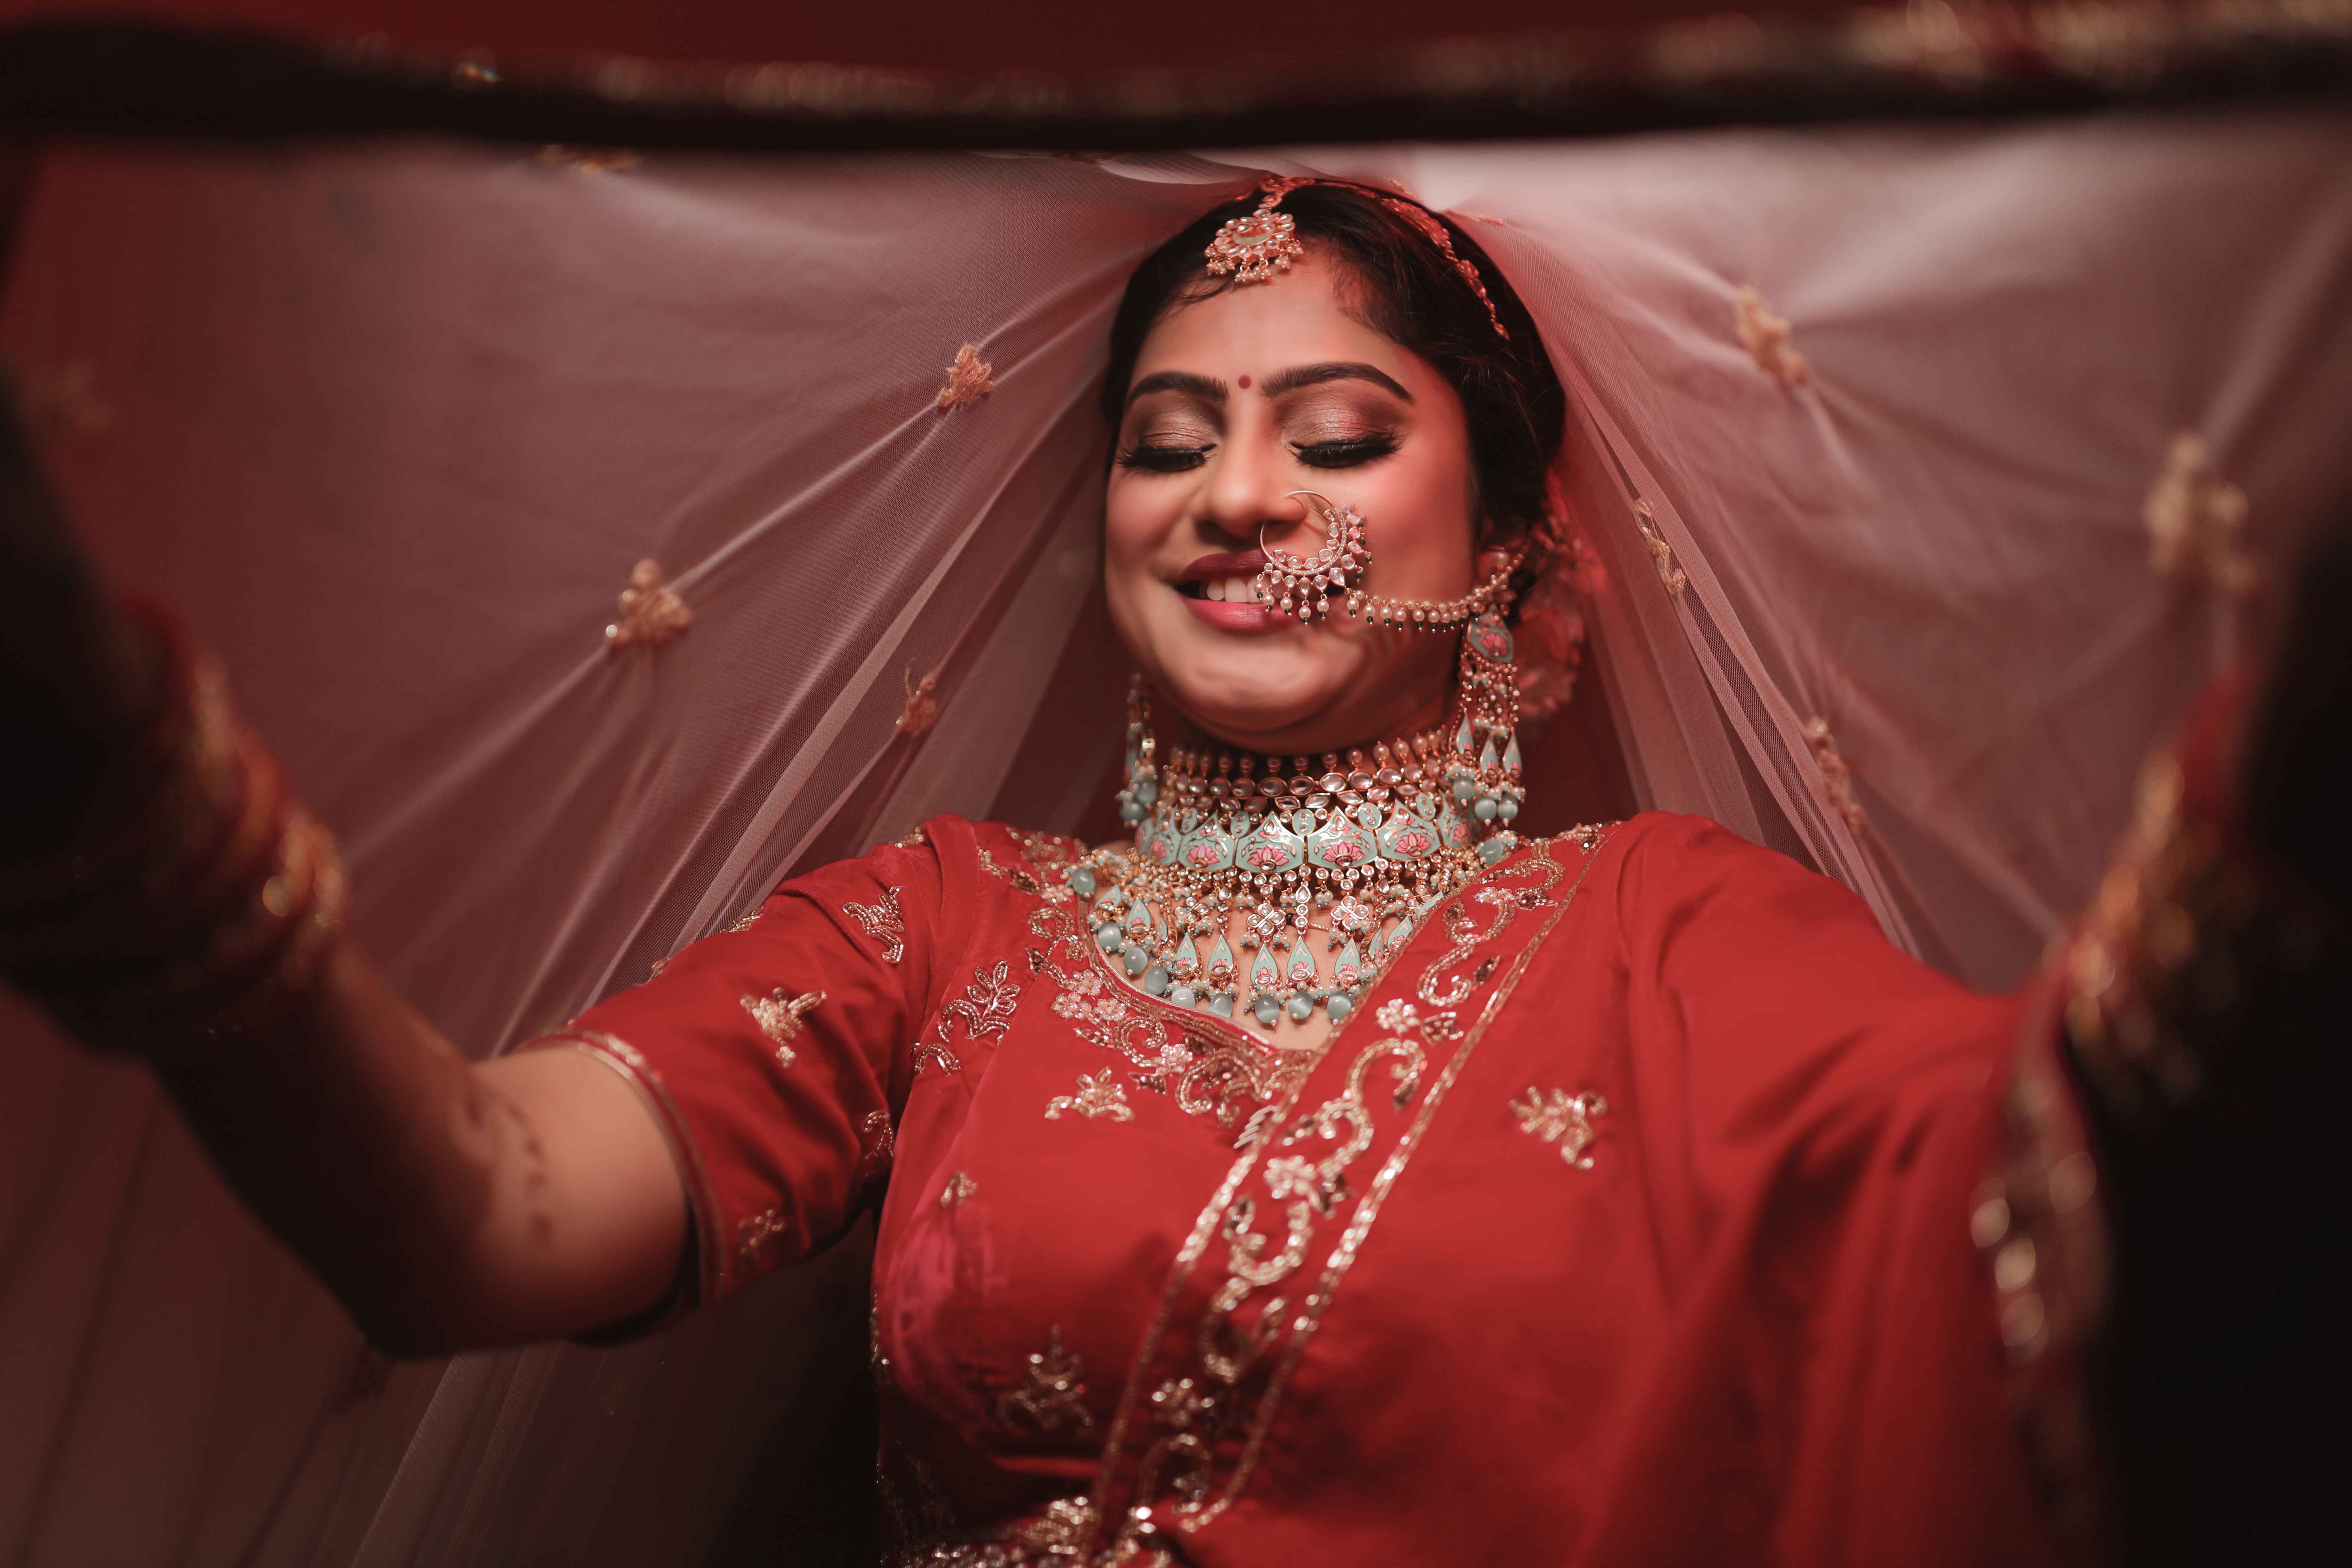 This Maharashtrian Bride’s Wedding Looks Are Worth Checking Out!